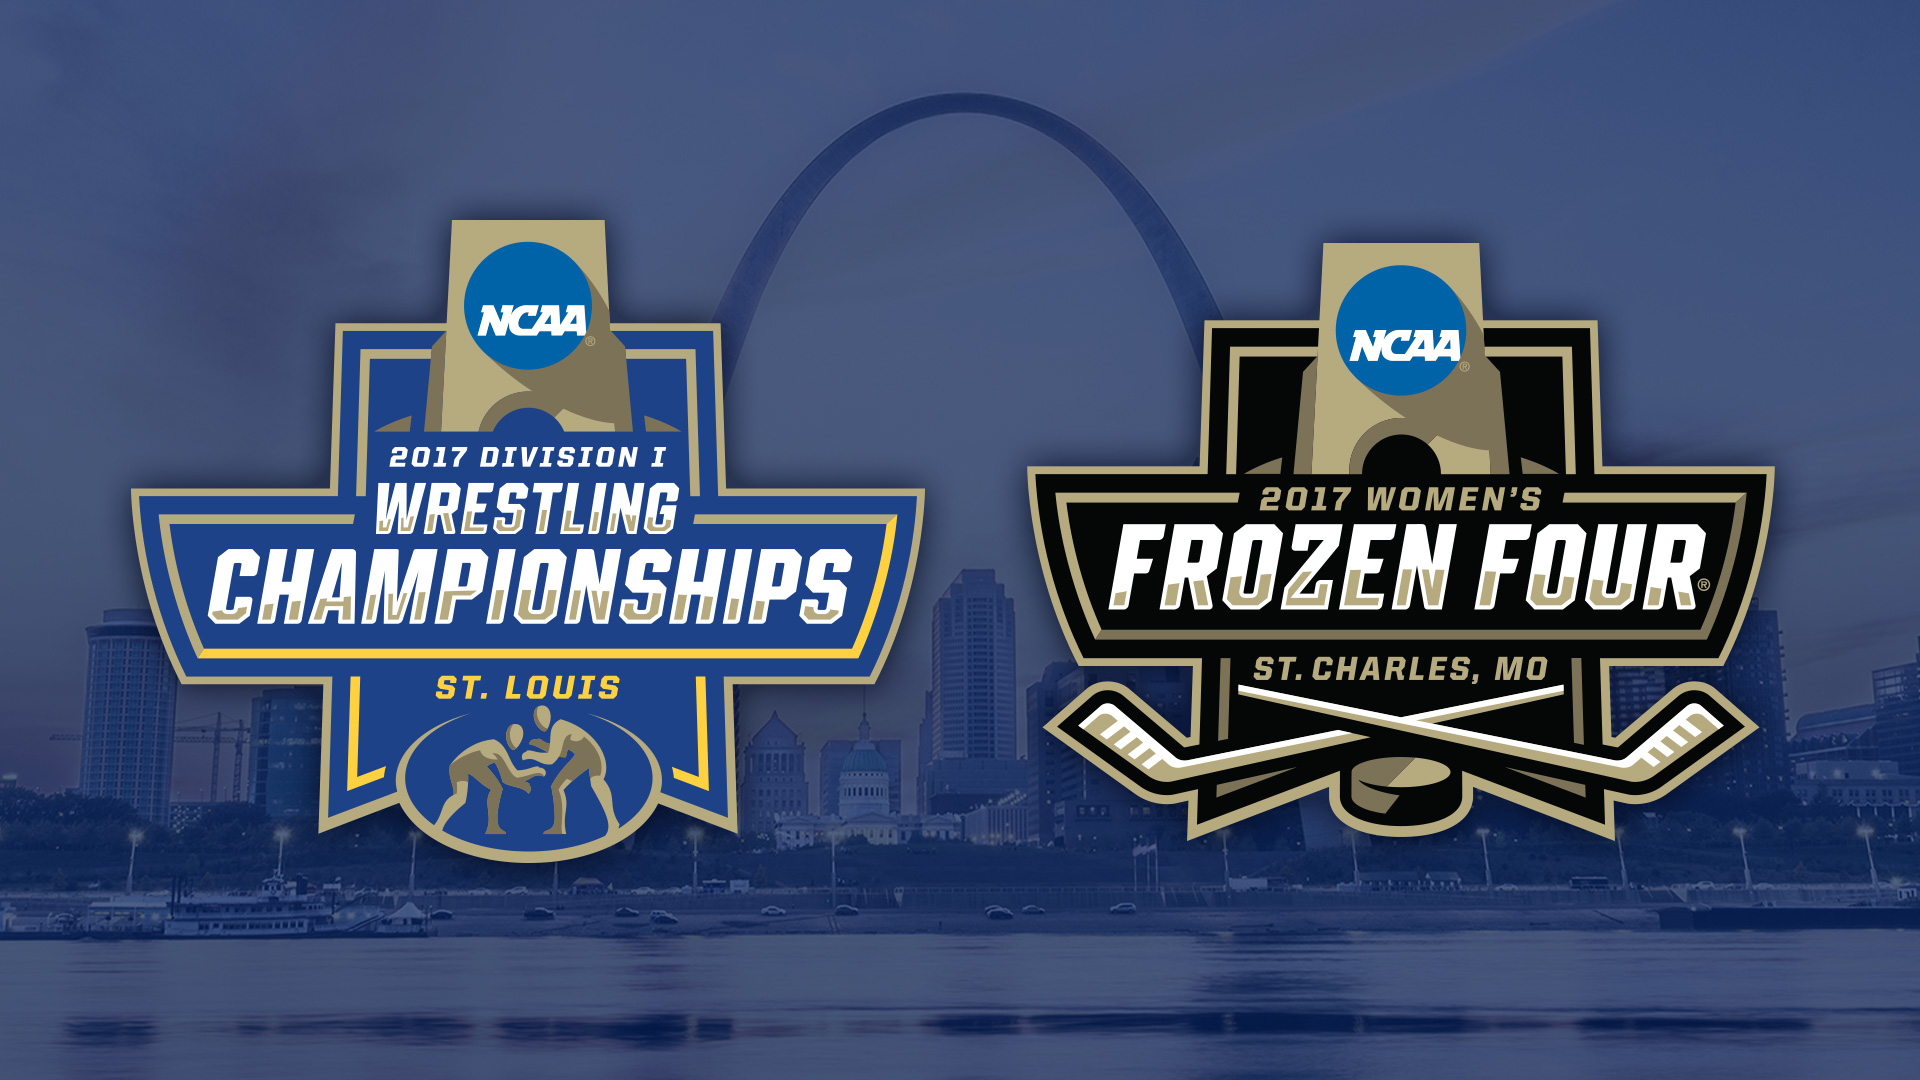 DAILY DOUBLE:  ST. LOUIS SITE OF NCAA WRESTLING CHAMPIONSHIPS AND WOMEN’S FROZEN FOUR THIS WEEKEND